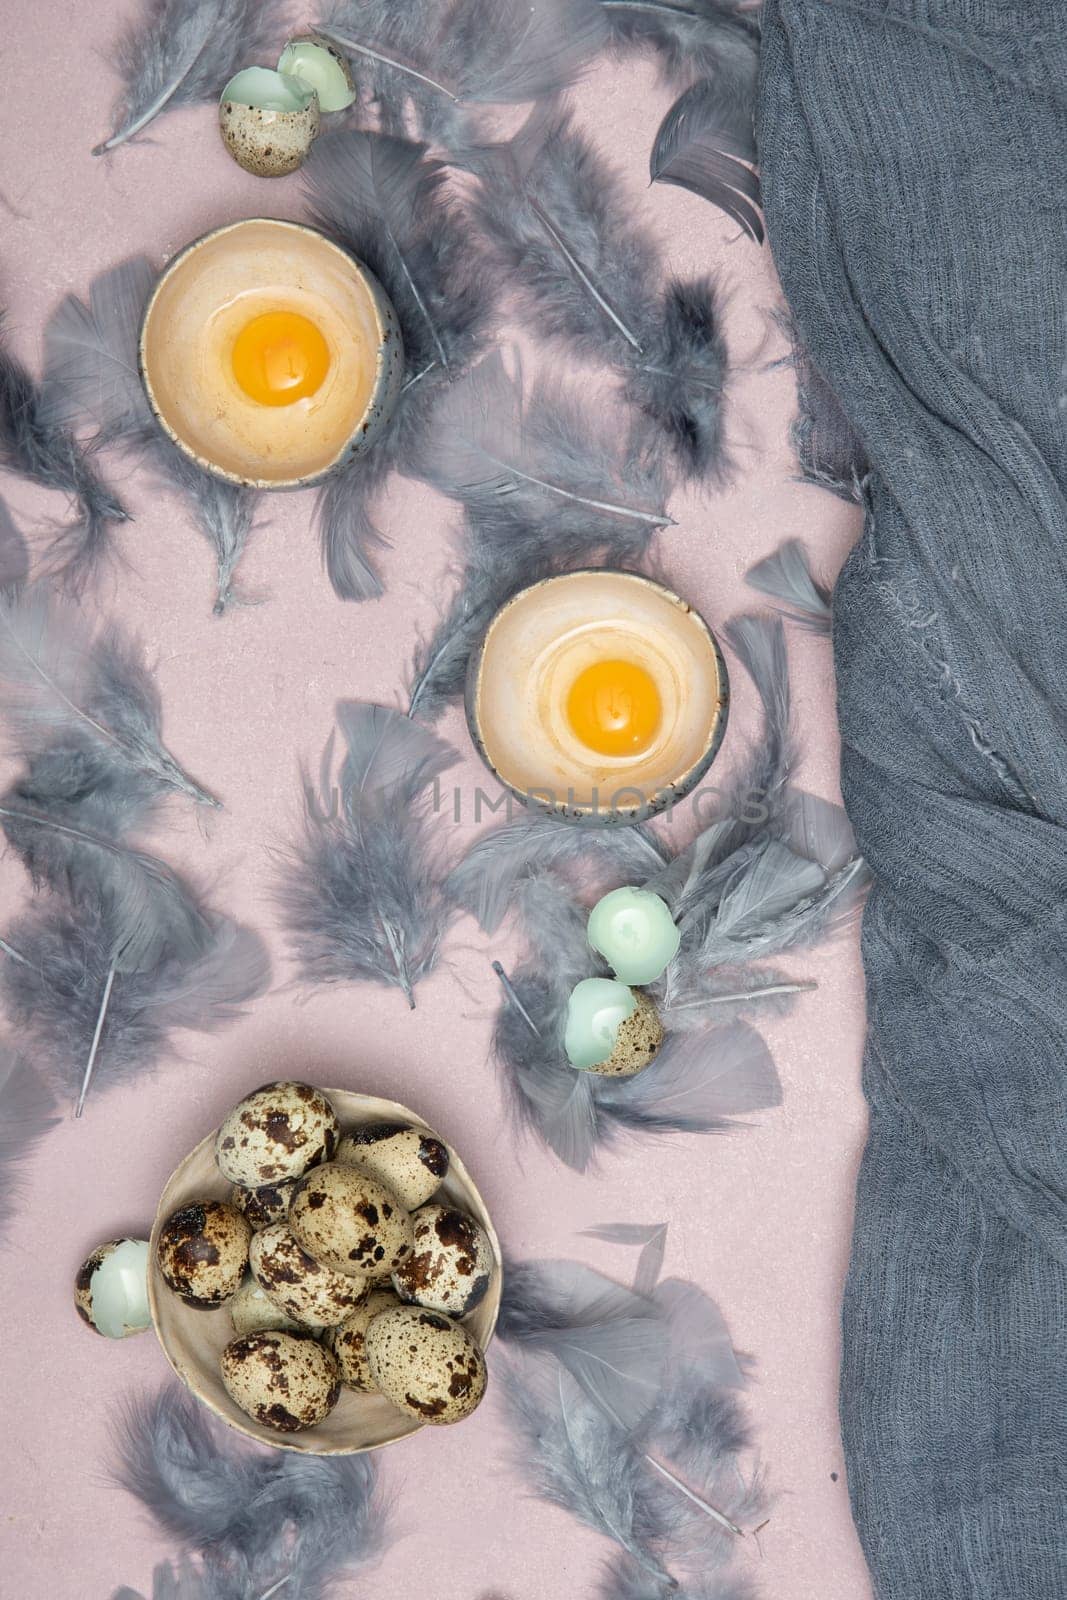 quail eggs in ceramic vases, gray feathers on the table, Easter still life with dietary eggs, diet and antioxidants, dark key and shallow depth of field, high quality photo